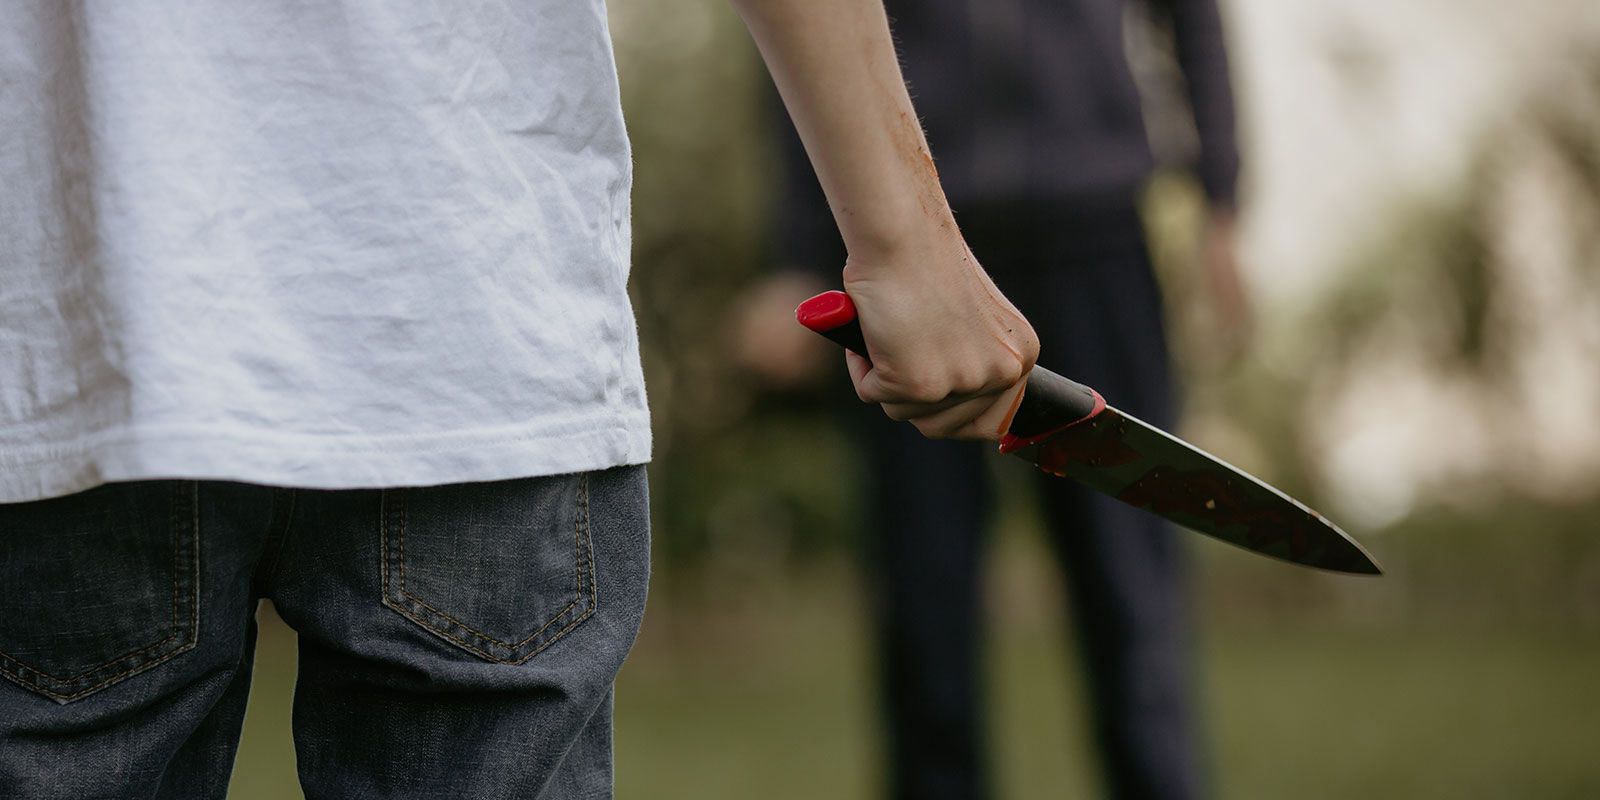 Two teenagers facing off, one holds a knife